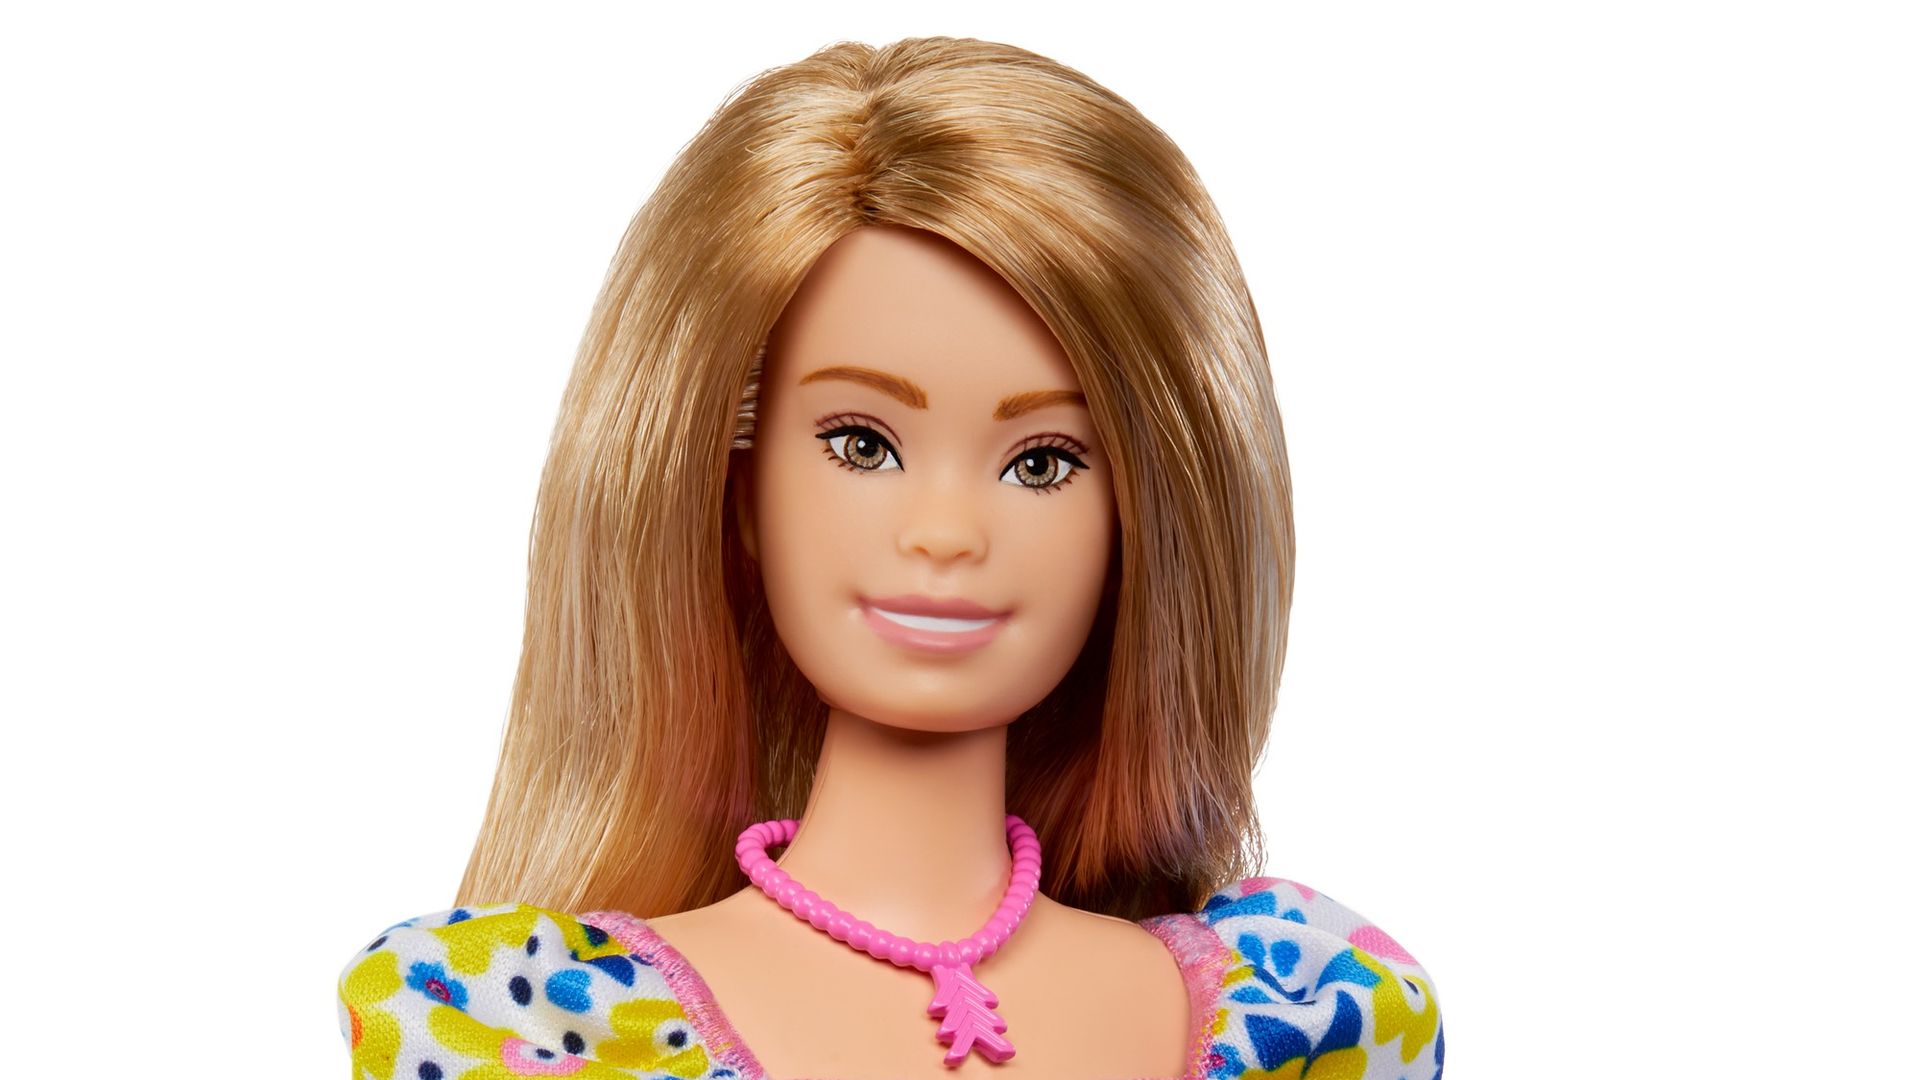 Vijf Nauw Nationaal volkslied Down syndrome Barbie: Mattel releases new doll